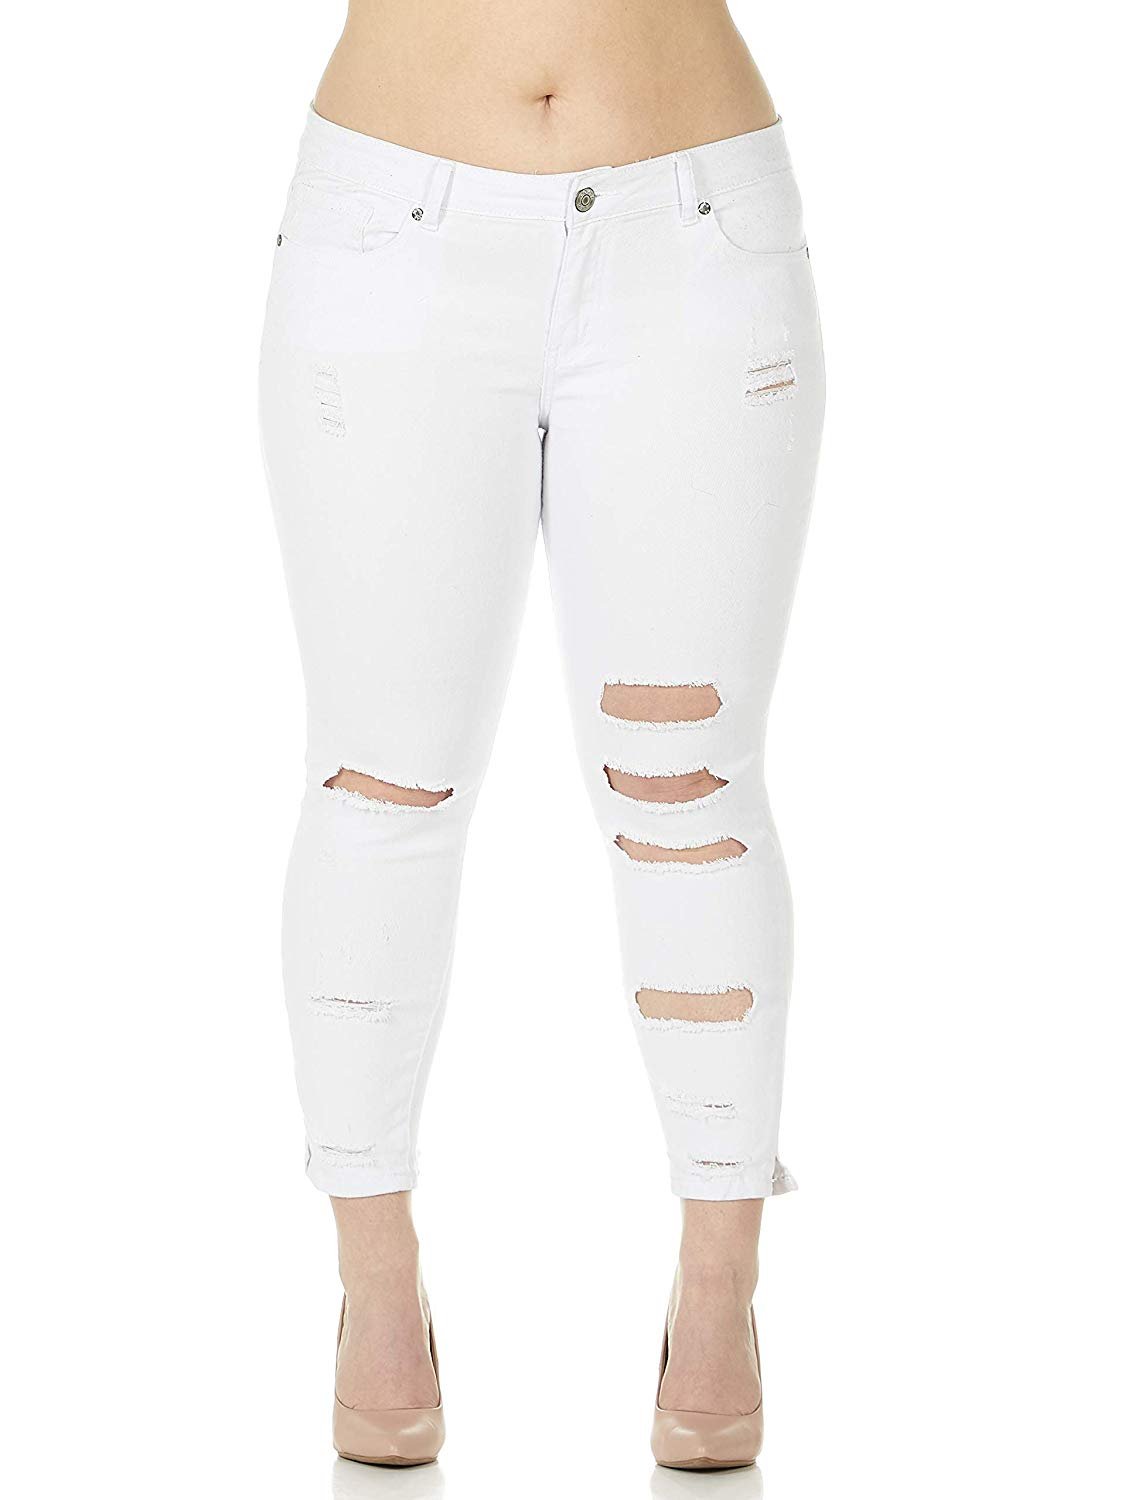 CG JEANS Plus Size Cute Juniors Big Mid Rise Large Ripped Torn Crop Skinny Fit, White Denim 22 - image 2 of 7